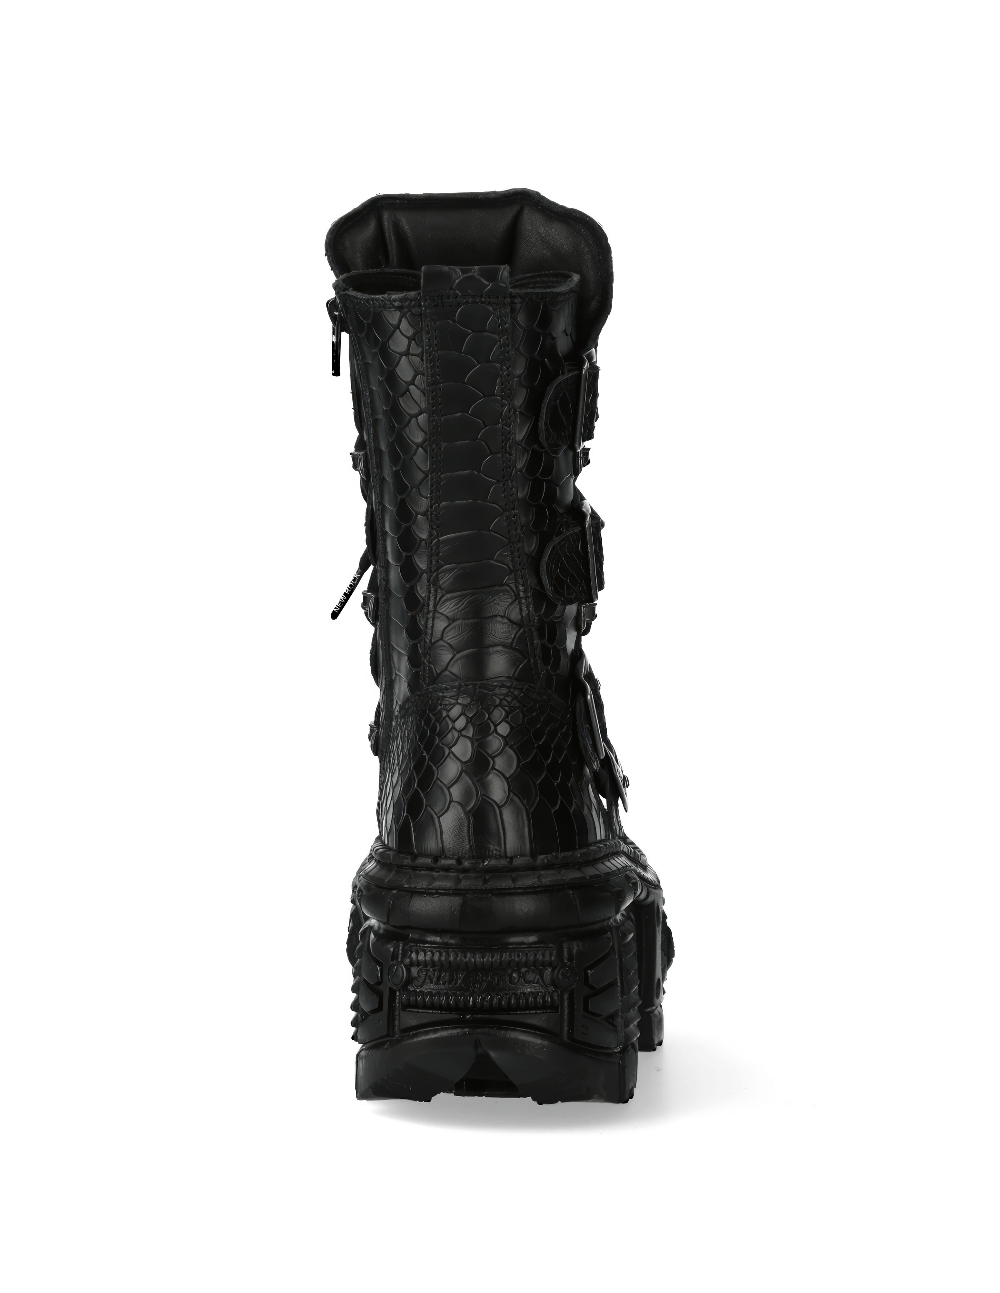 NEW ROCK Gothic Mid-Calf Boots with Buckles and Zipper